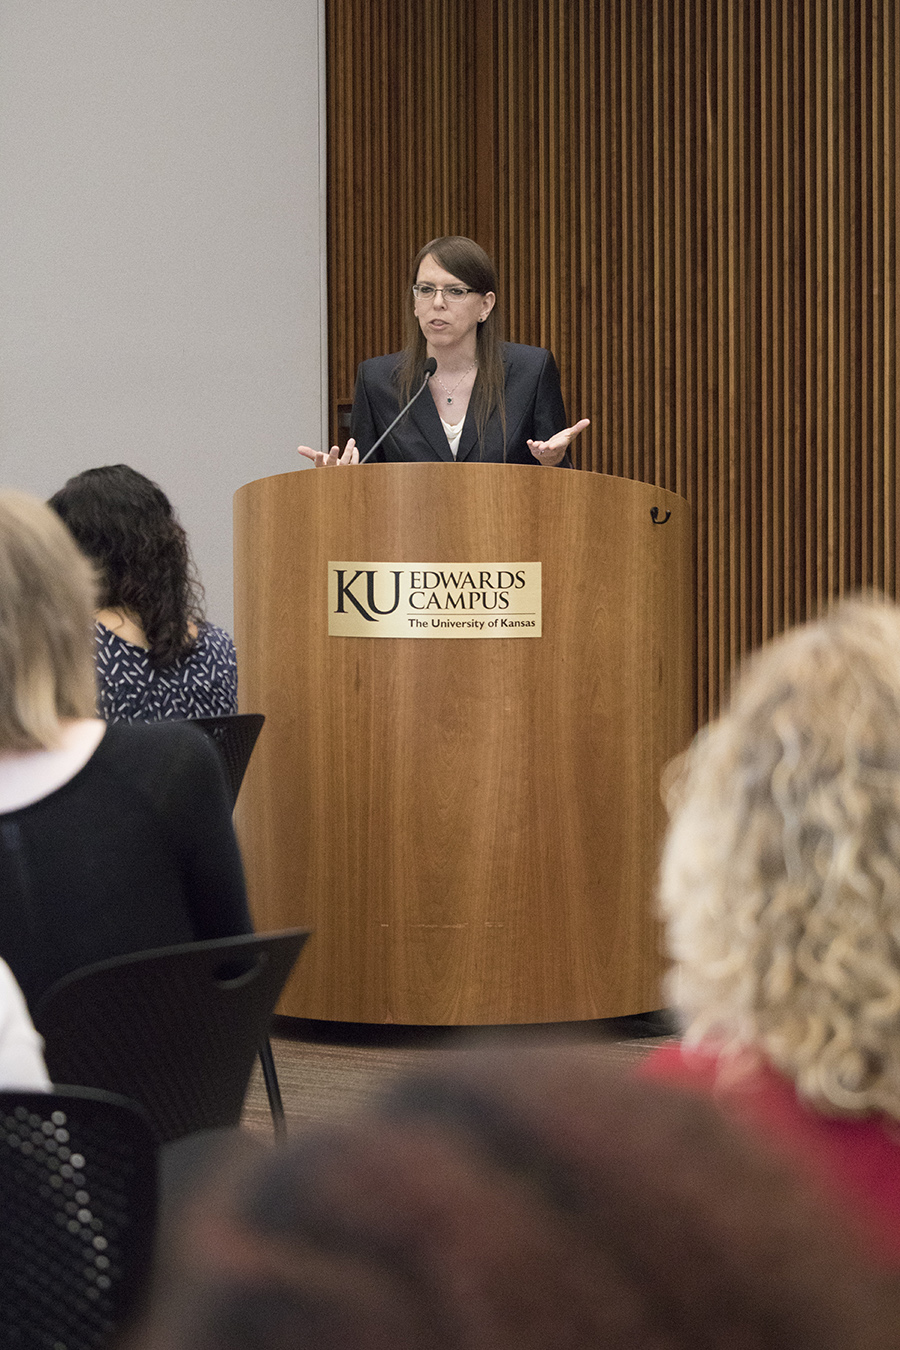 Una Nowling, a KU alumna and transgender woman who works as an engineering consultant for Black & Veatch, speaks to KUEC faculty and staff about the transgender experience in the workplace.